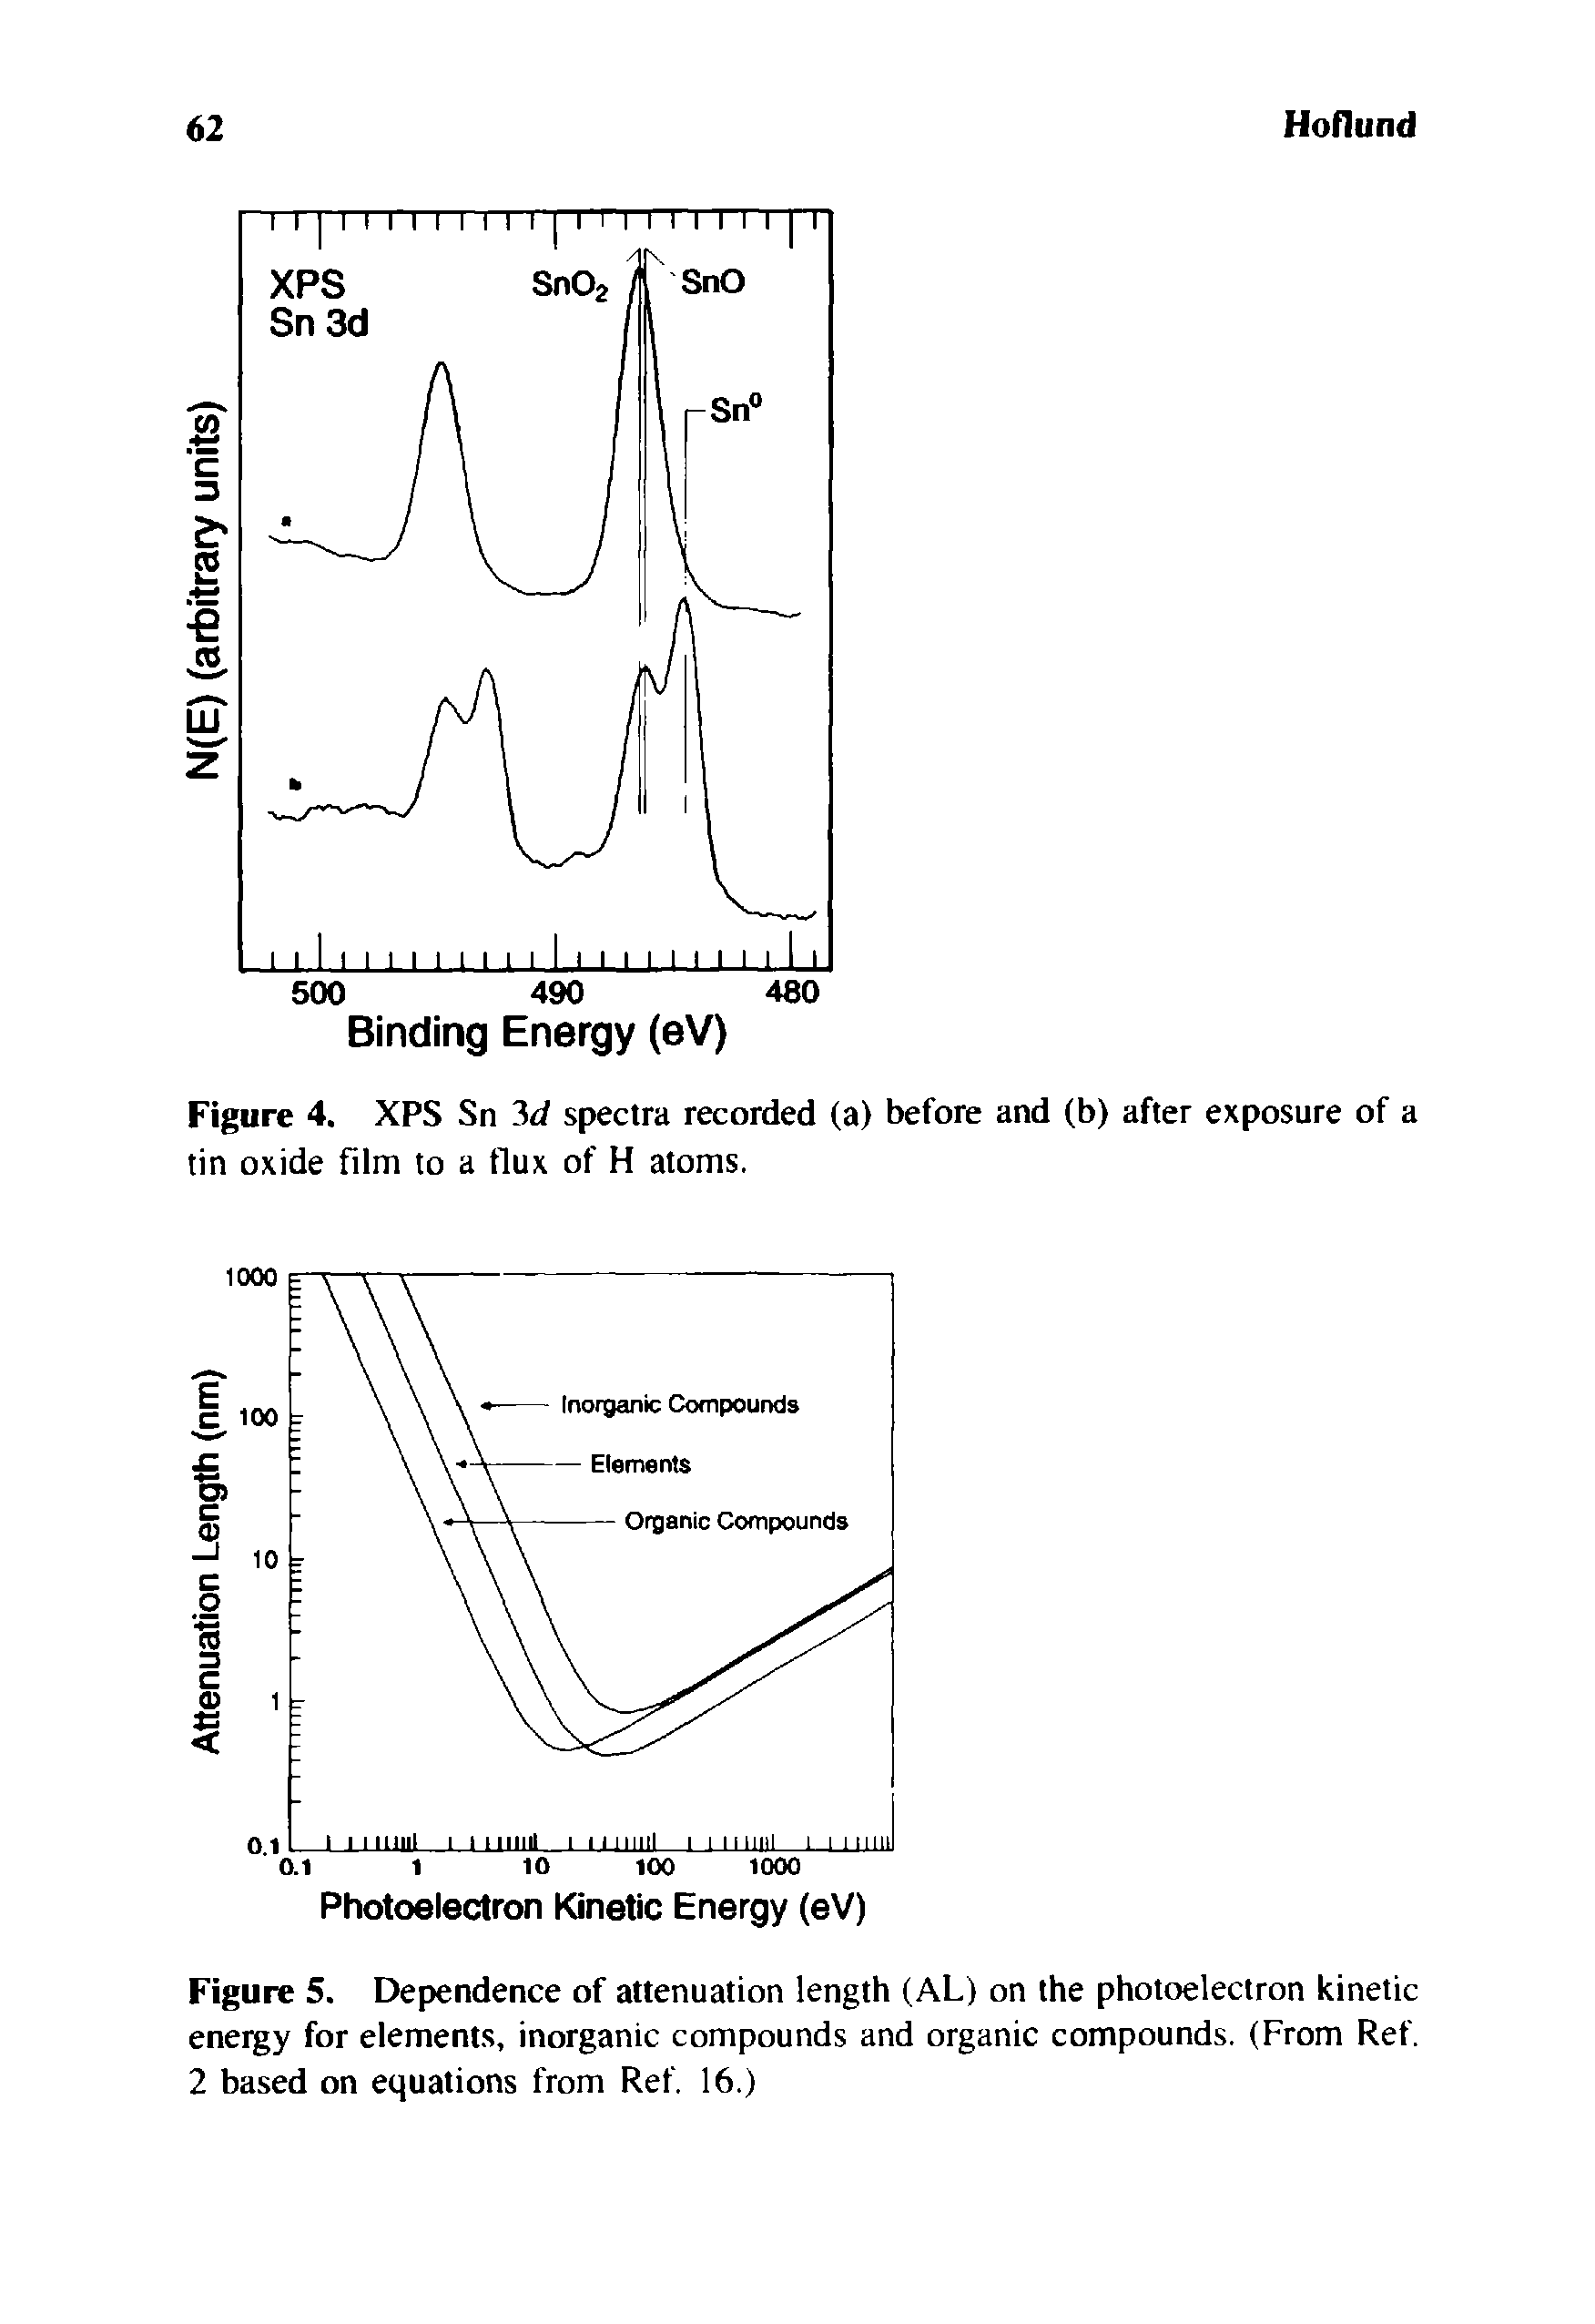 Figure 5. Dependence of attenuation length (AL) on the photoelectron kinetic energy for elements, inorganic compounds and organic compounds. (From Ref. 2 based on equations from Ref. 16.)...